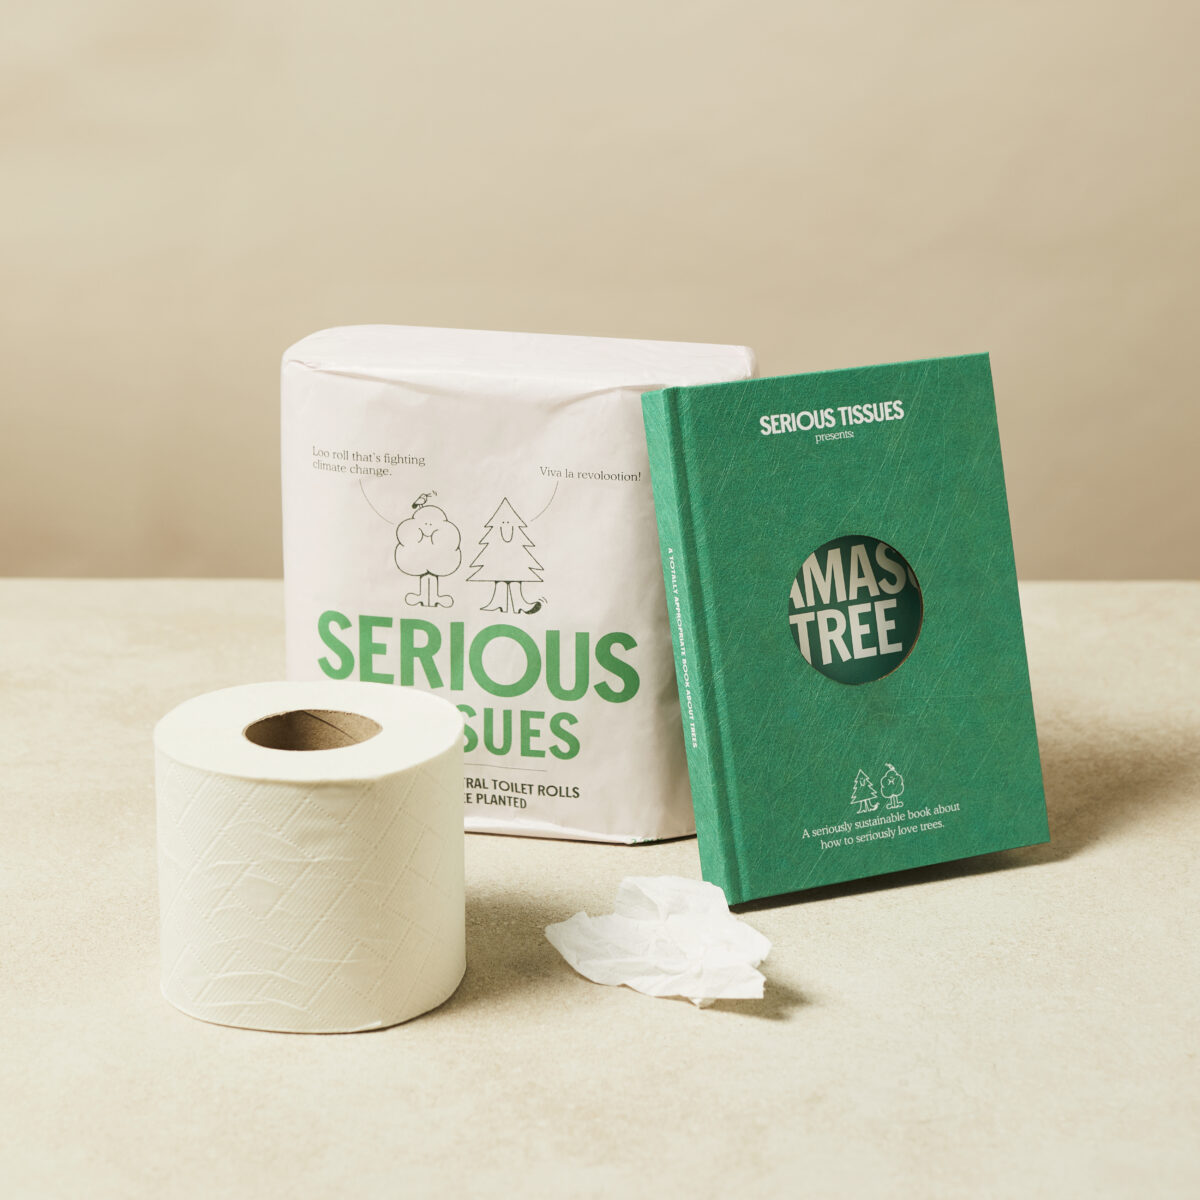 Toilet roll brand, Serious Tissues, has unveiled a special edition bathroom book in a bid to highlight the brand’s commitment to caring for the planet.